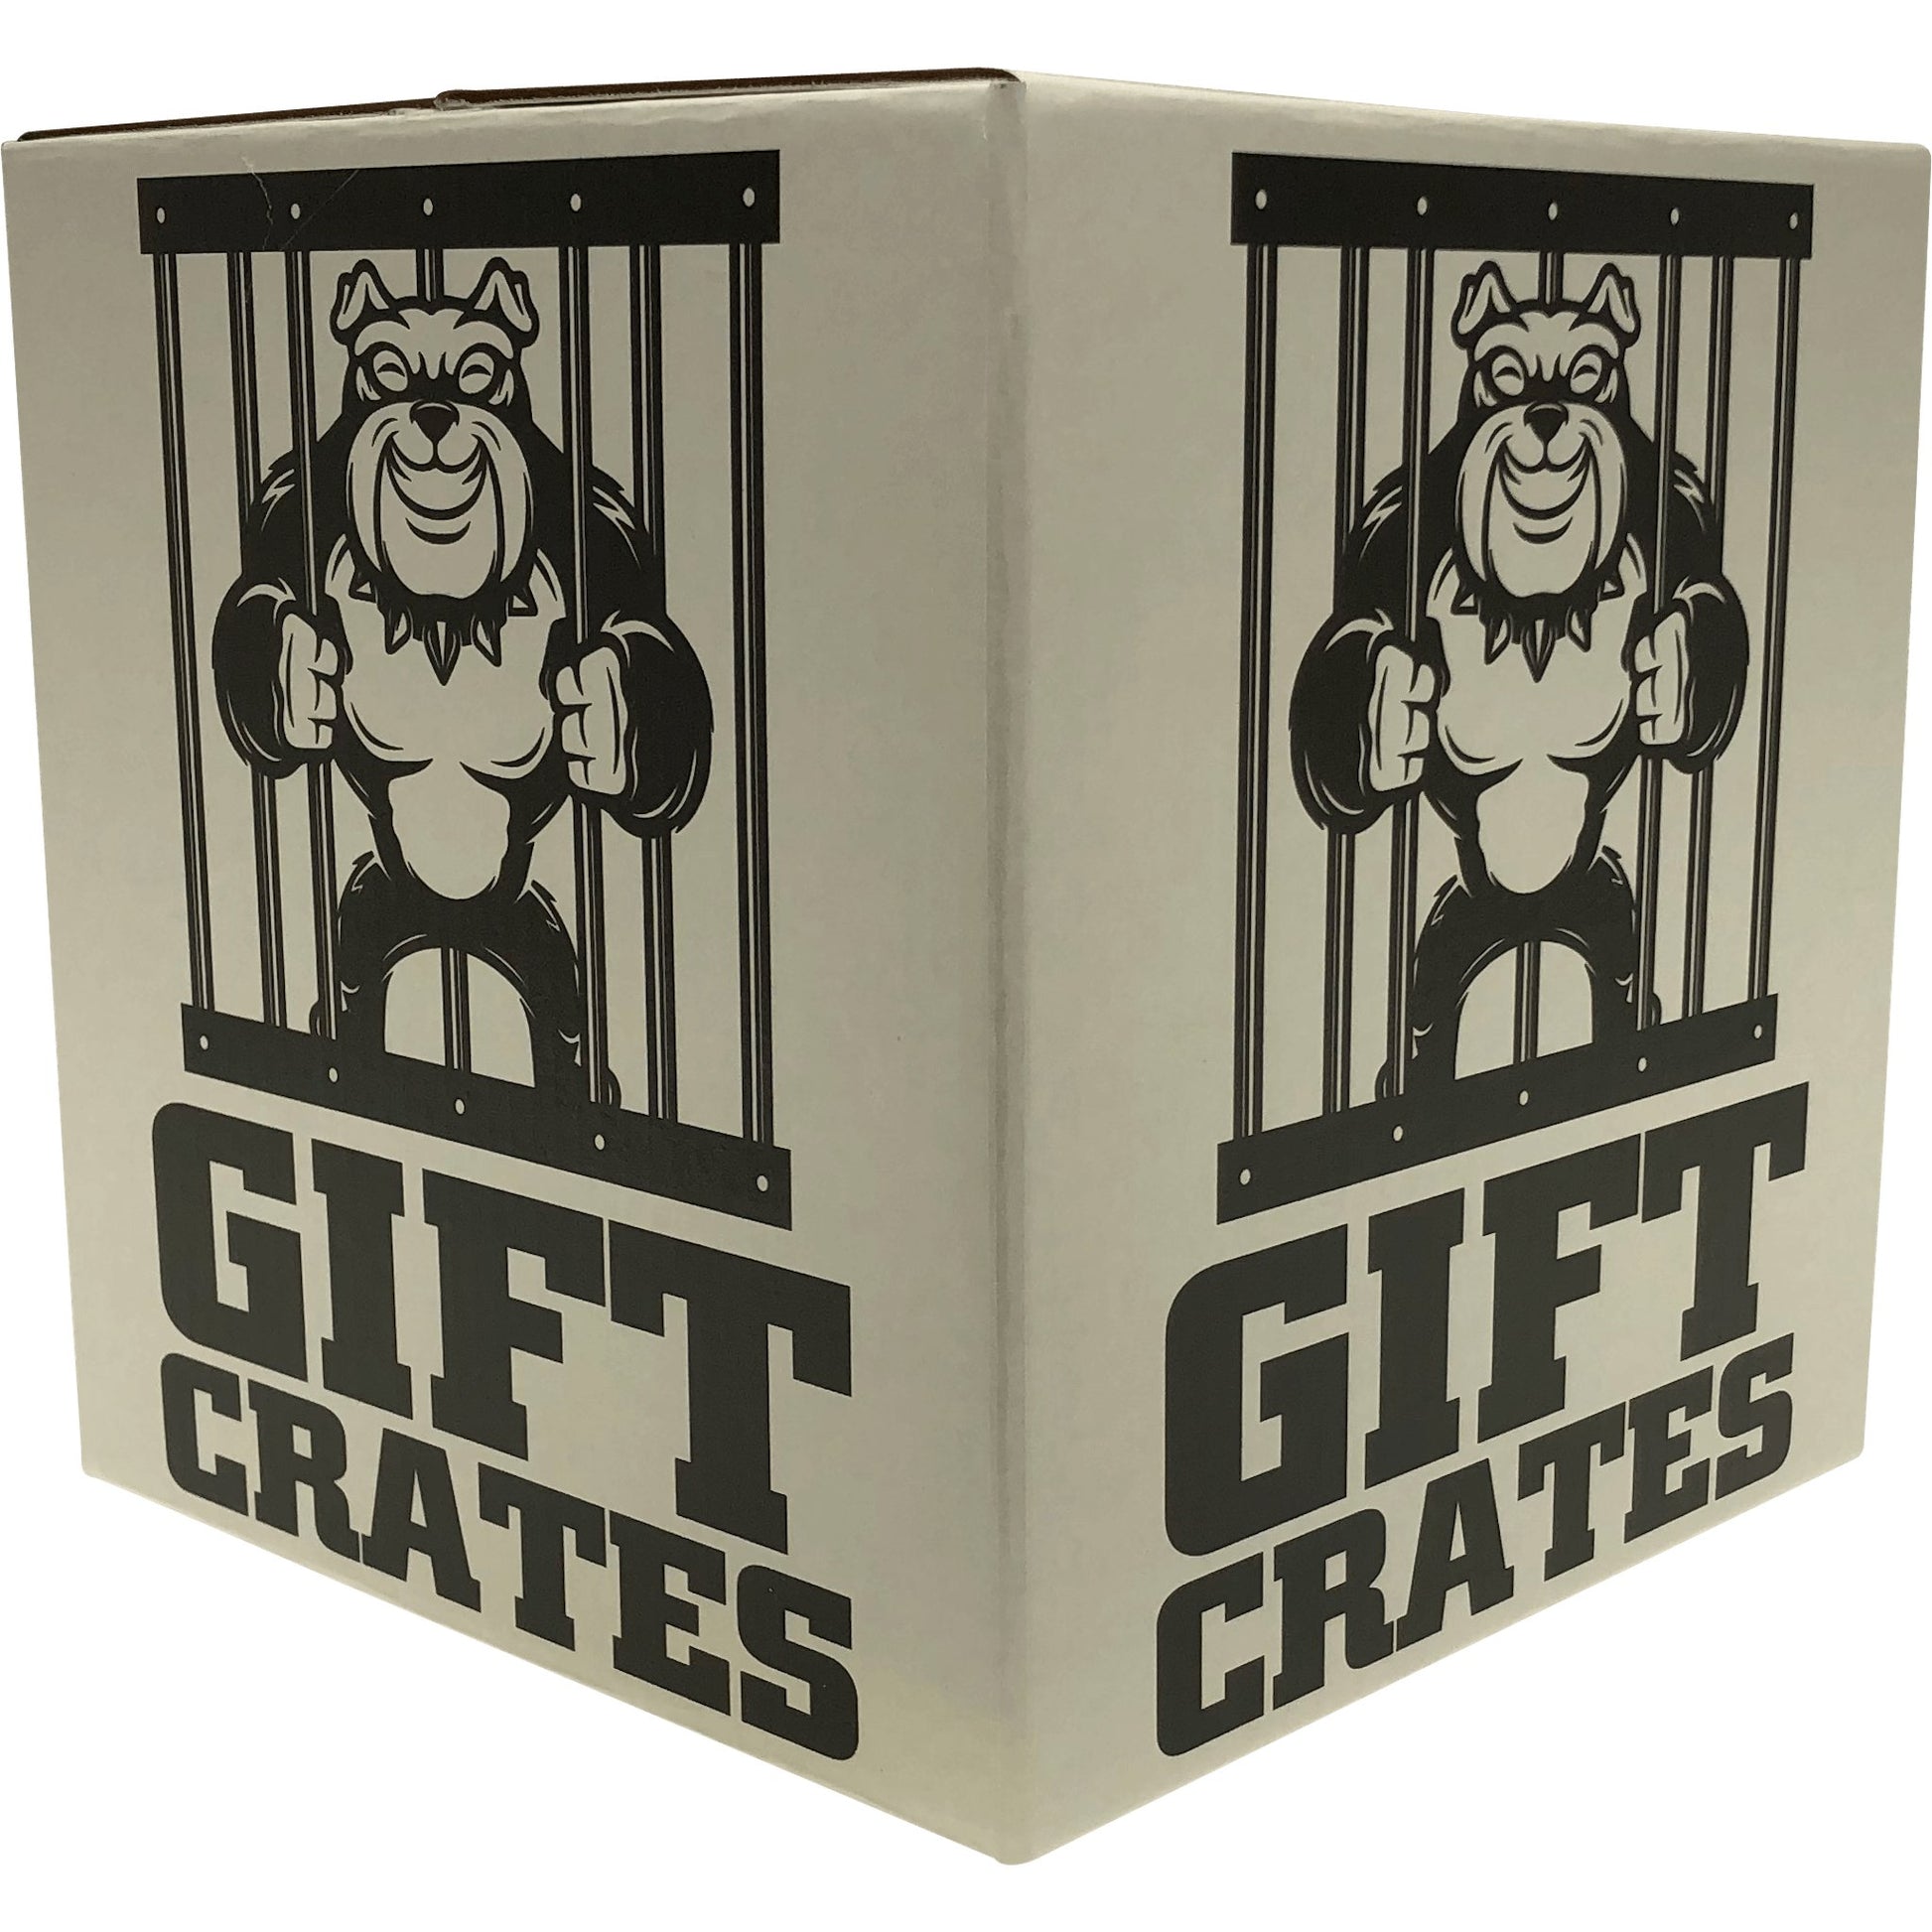 Game Night Crate - Gift Crates